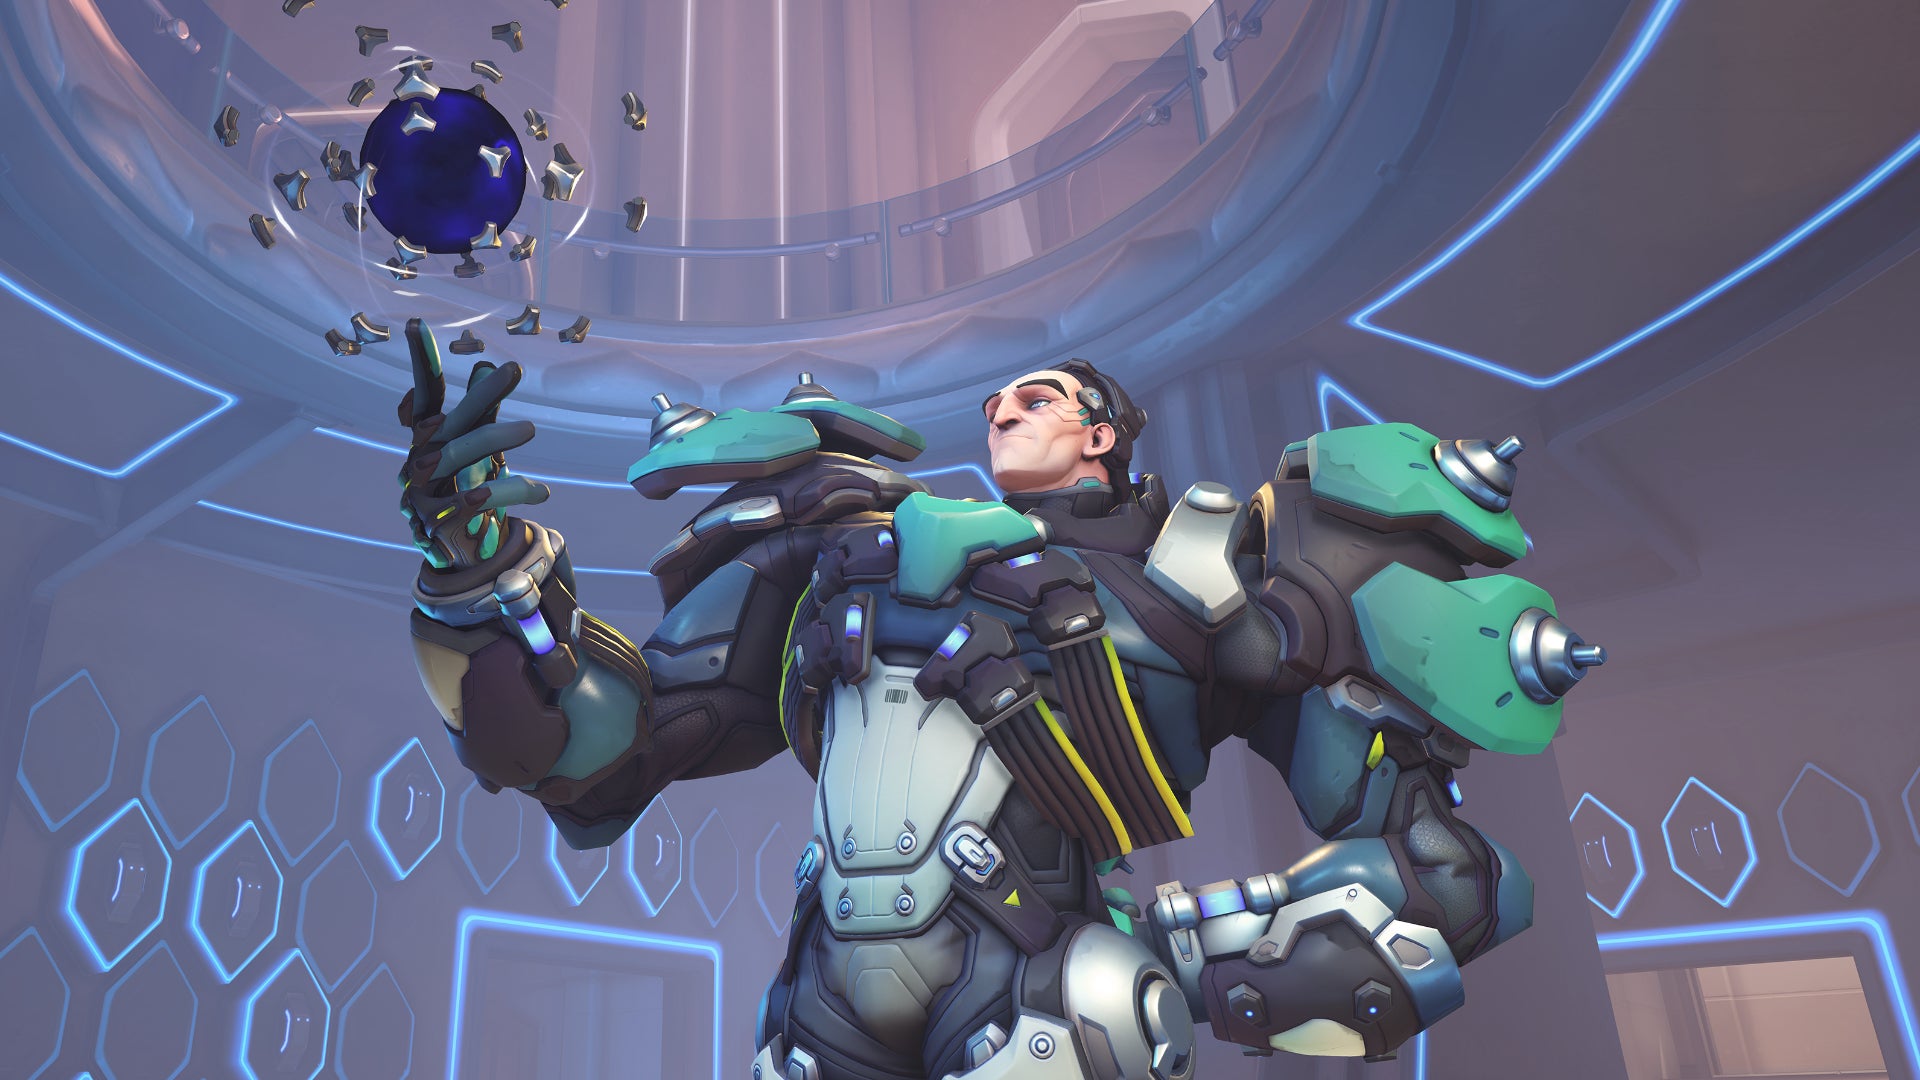 Sigma, a hero in Overwatch 2, plays with one of his hyperspheres in a high-tech indoor location.